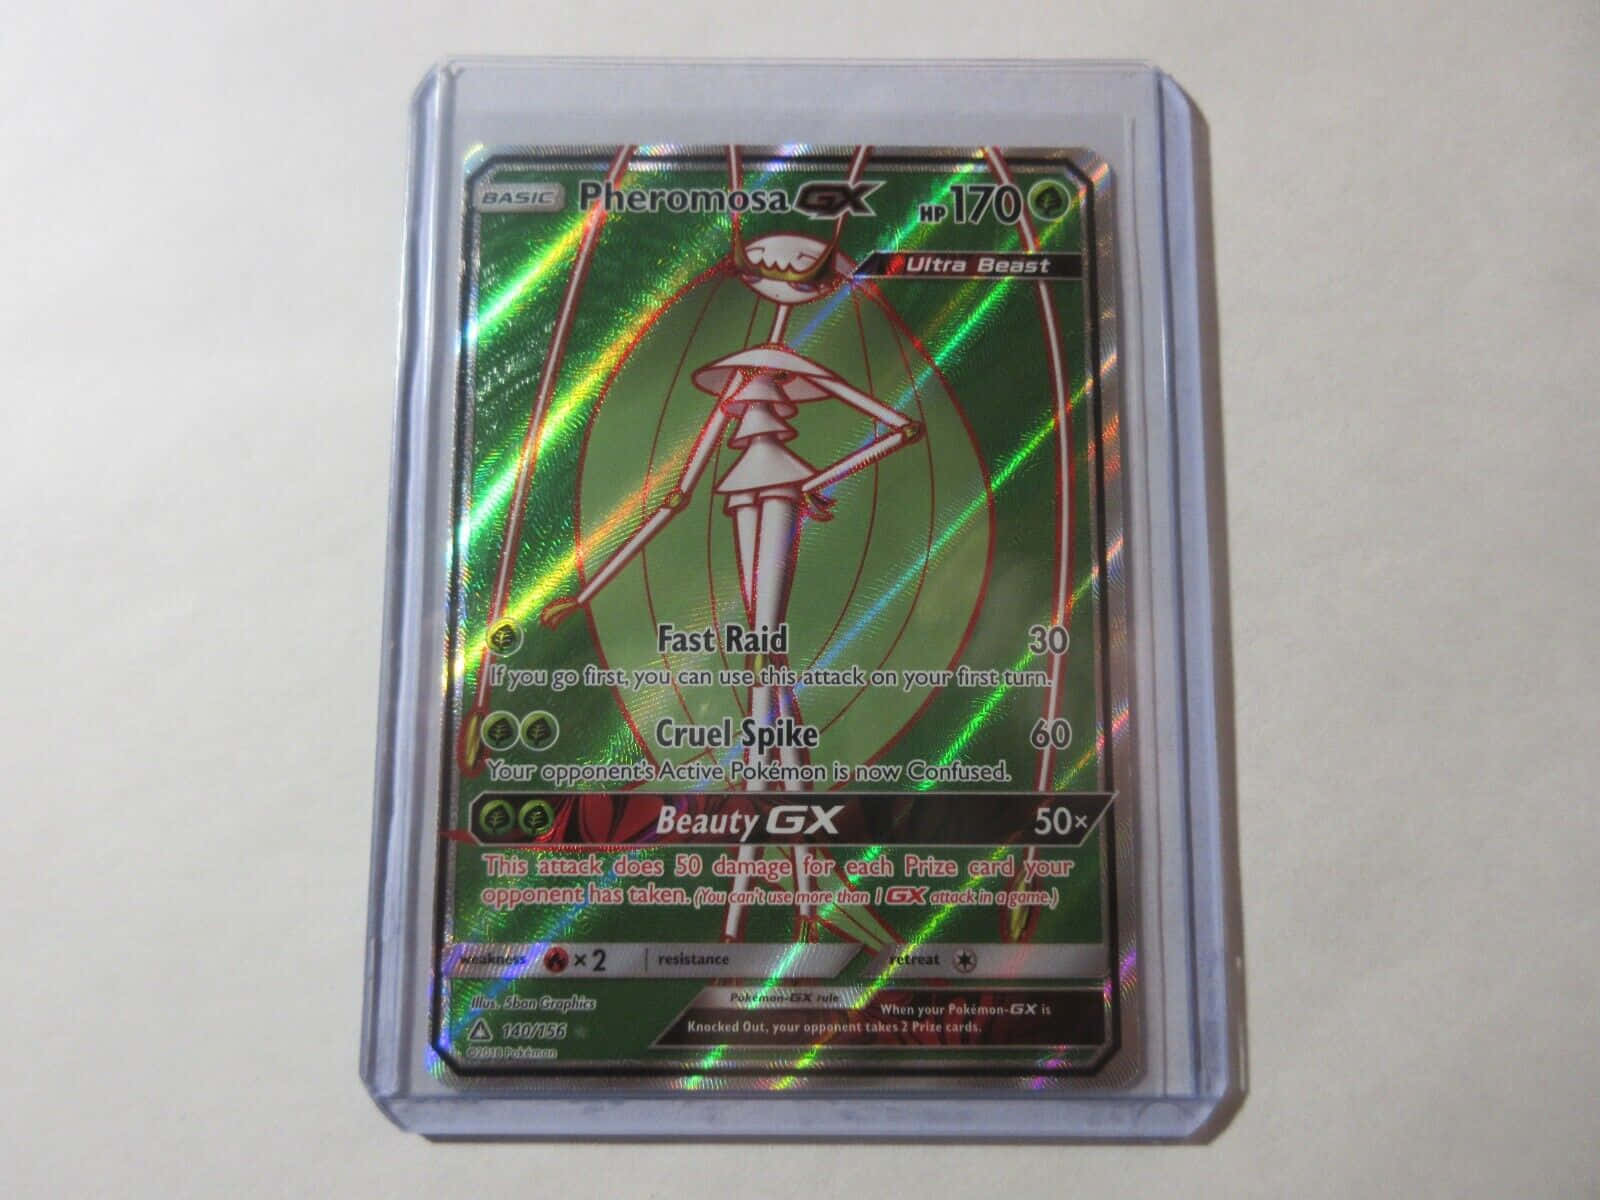 Pheromosa Pokémon Trading Card Encased in a Clear Protective Sleeve Wallpaper